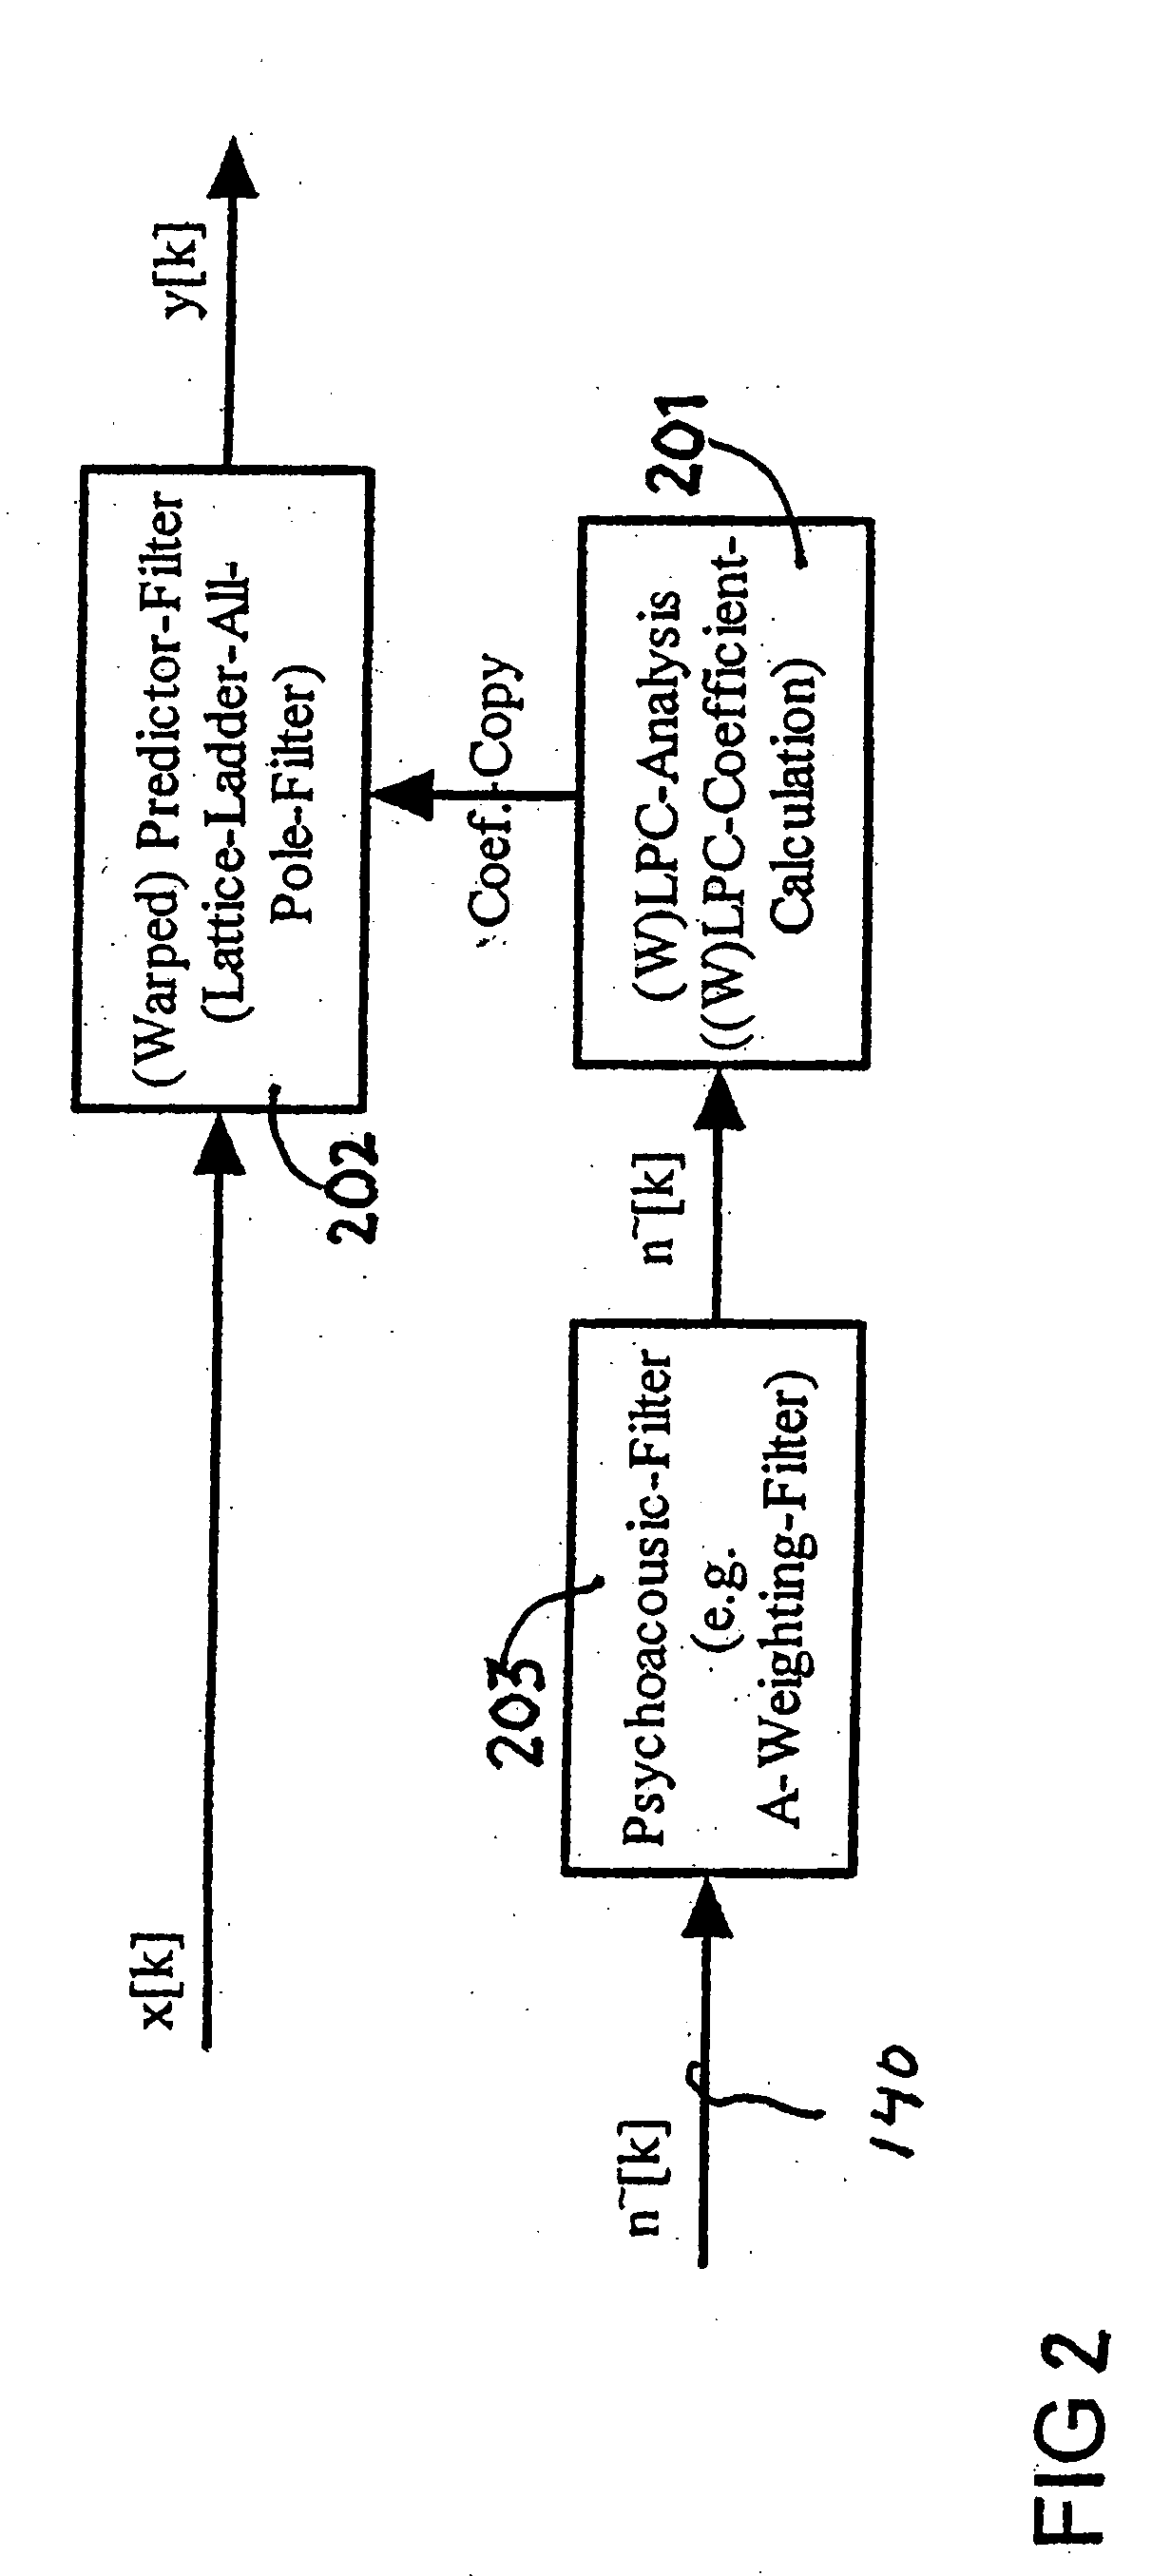 Audio enhancement system and method